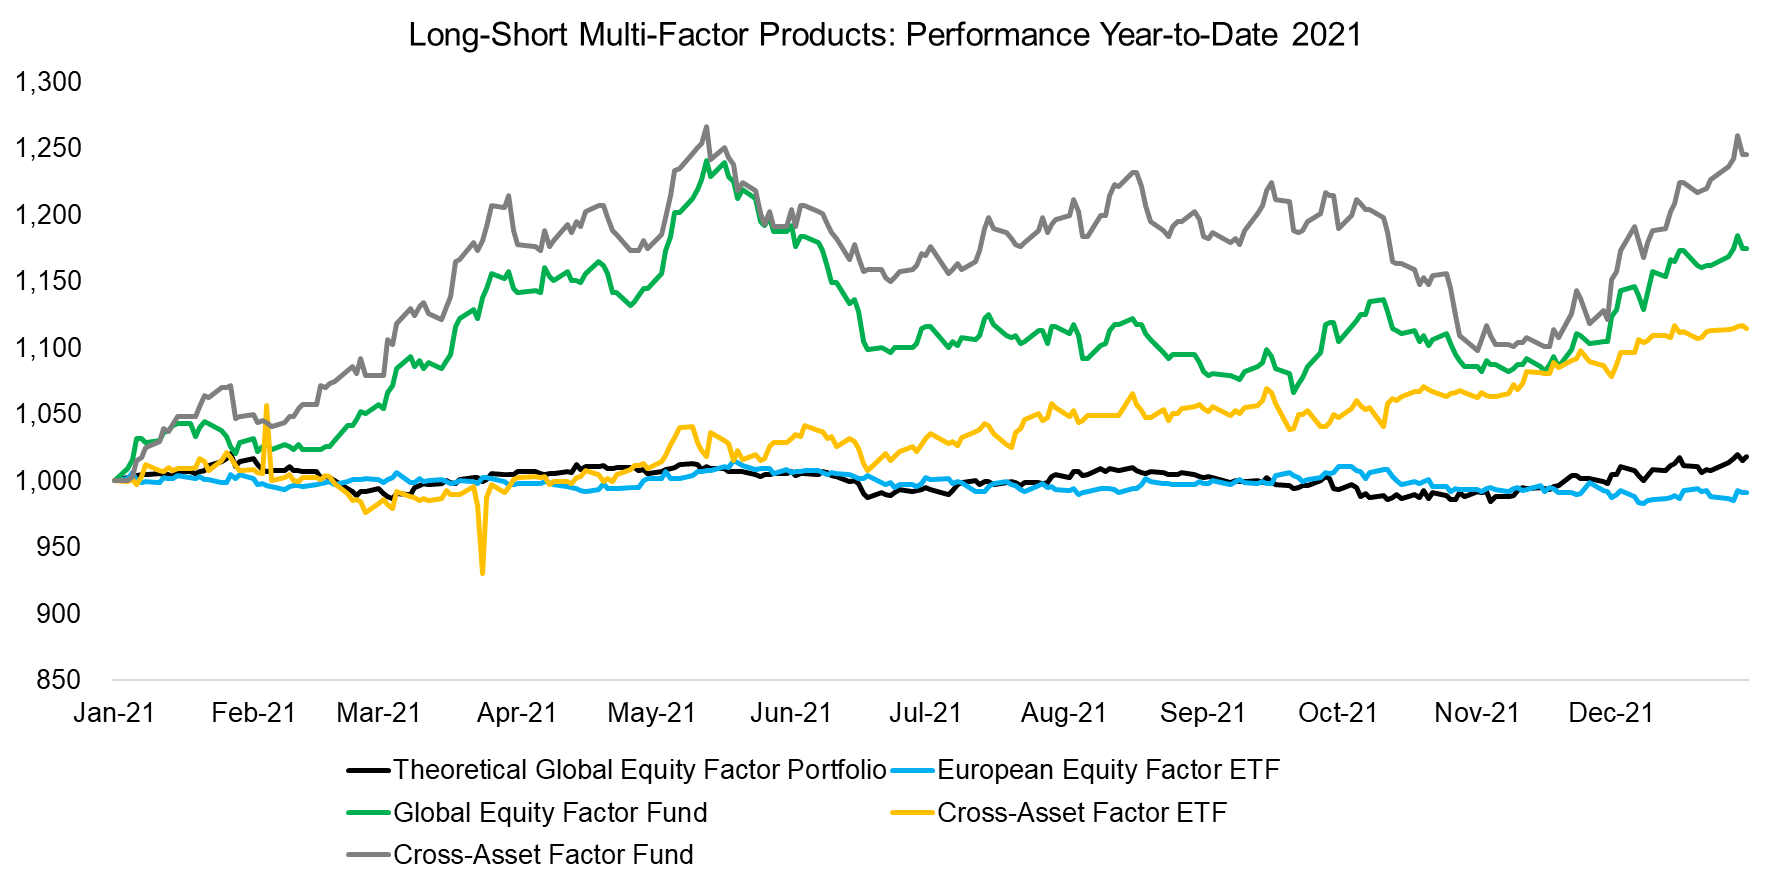 Long-Short Multi-Factor Products Performance Year-to-Date 2021